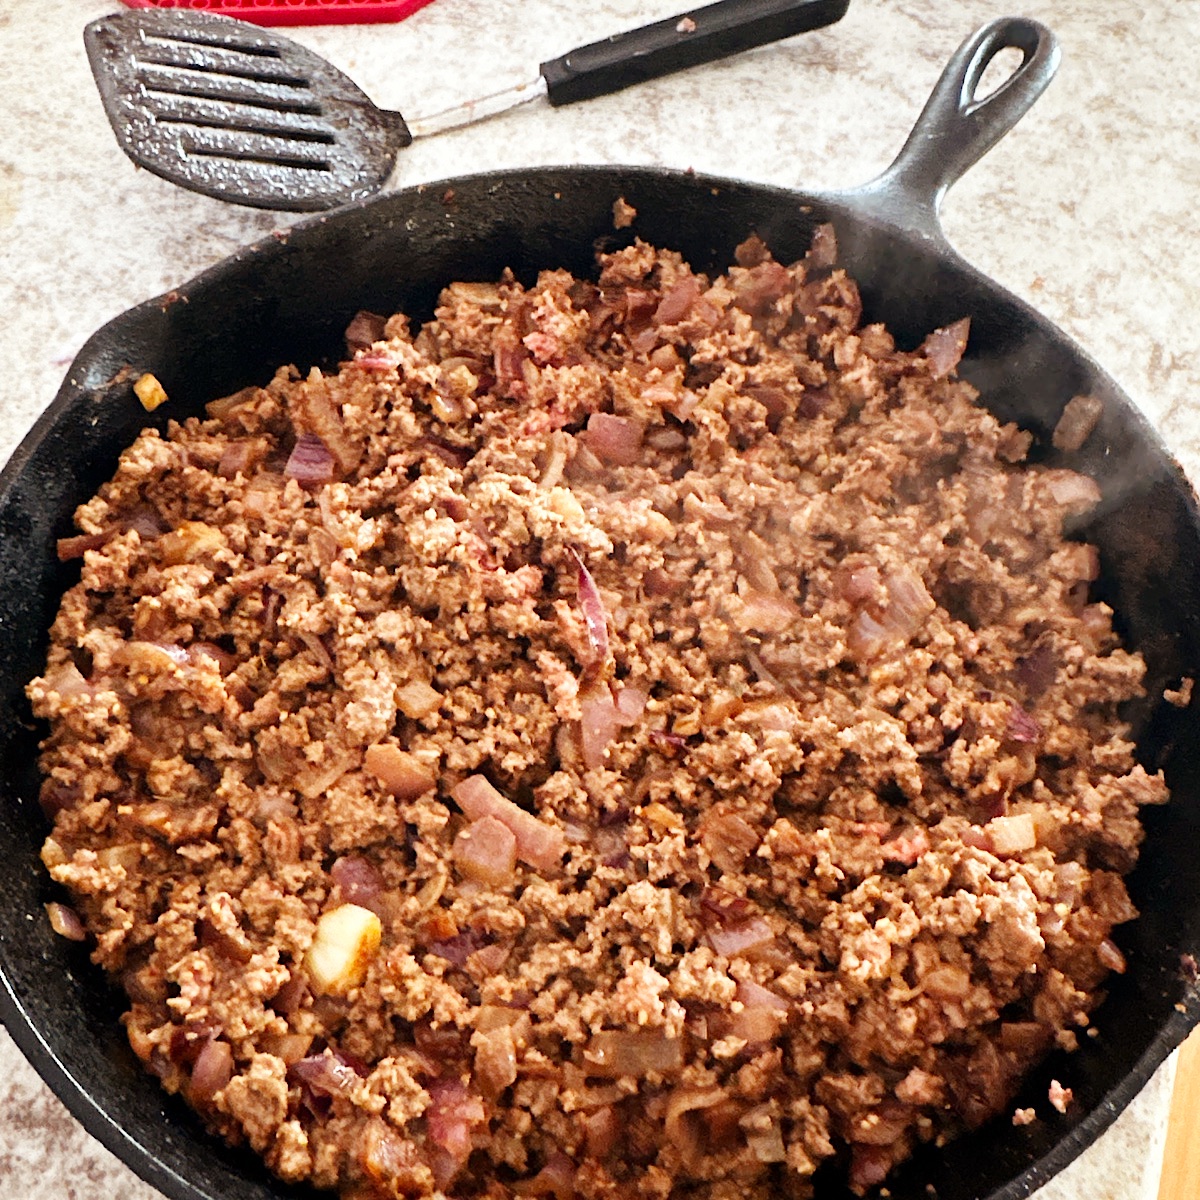 Ground beef, onions and spices cooking in black cast iron skillet.